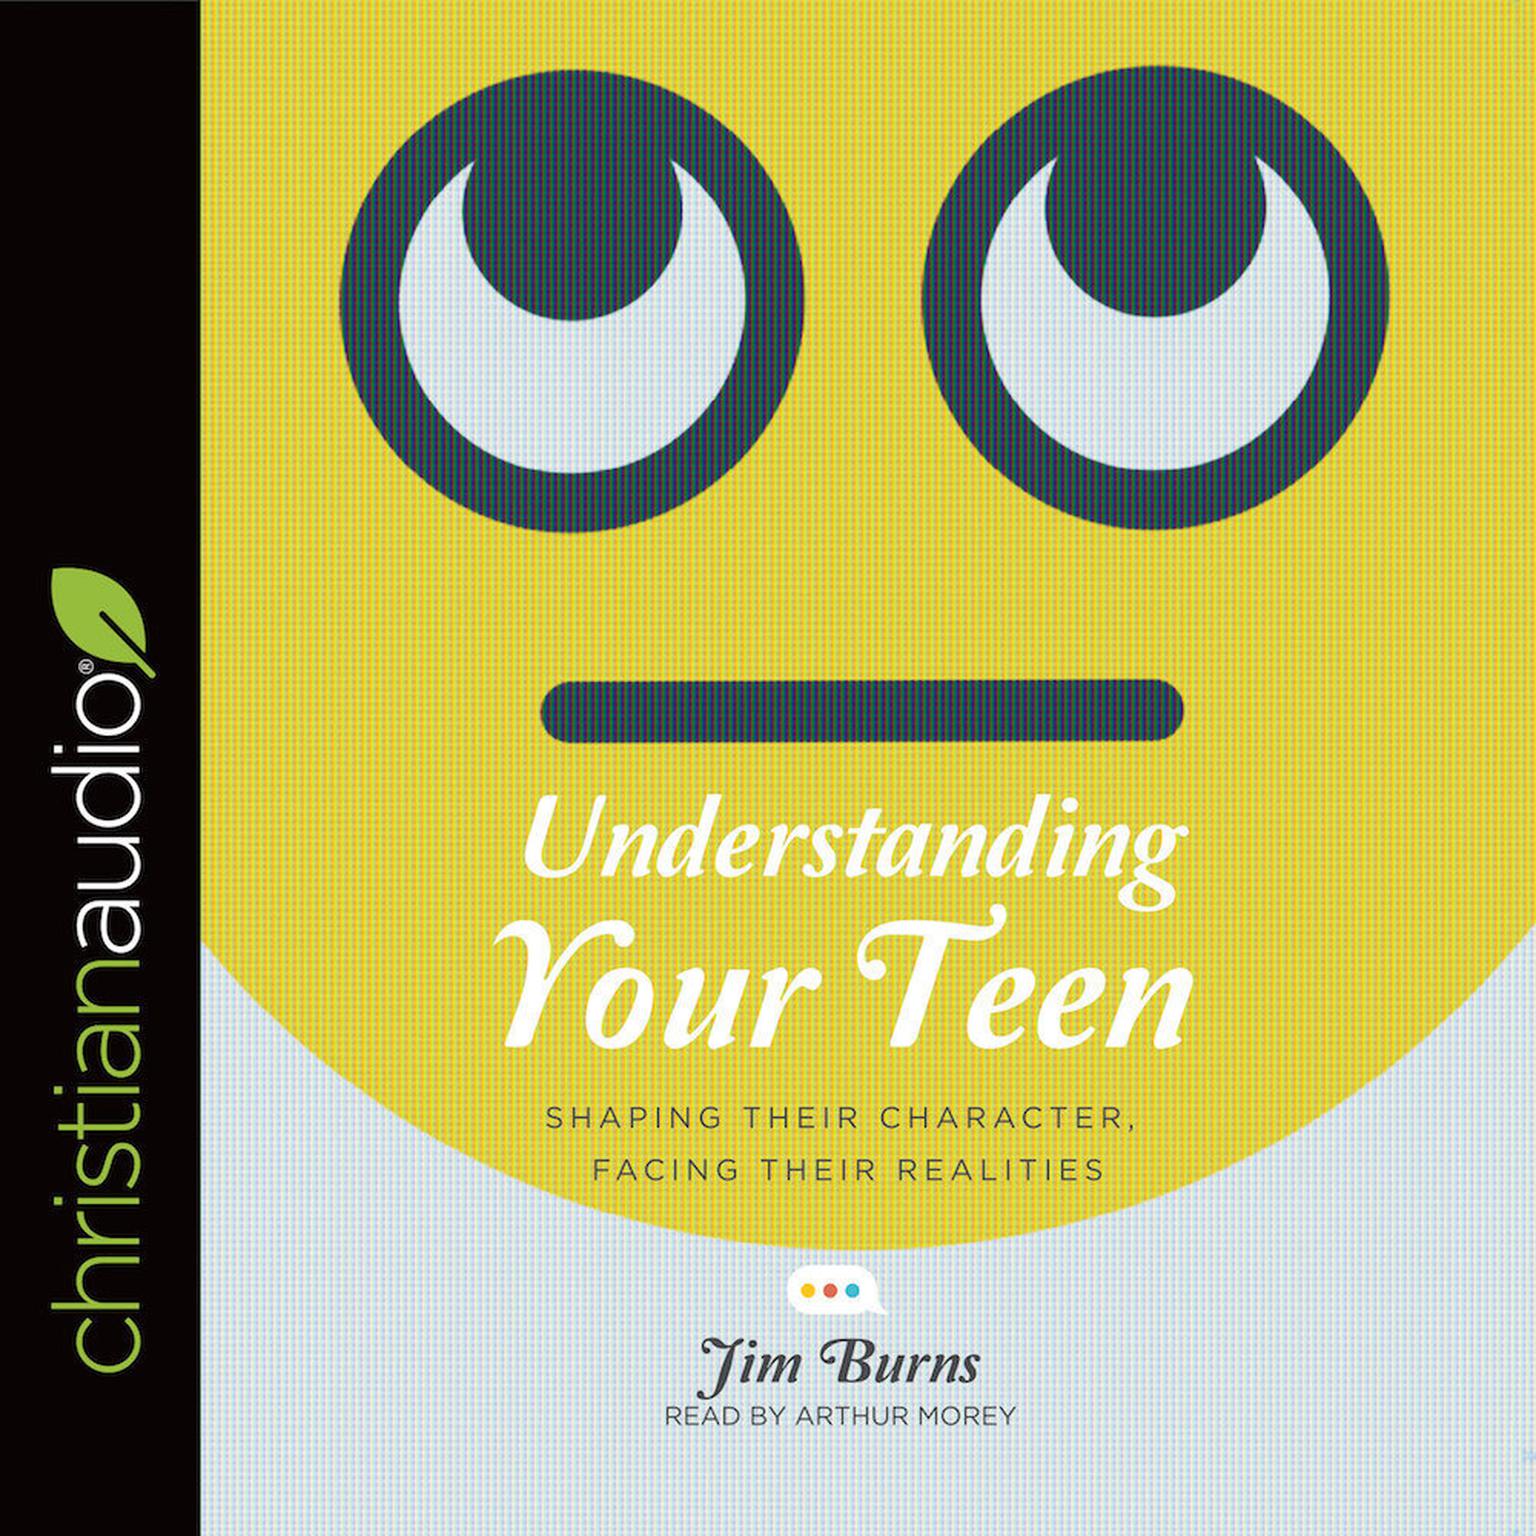 Understanding Your Teen: Shaping Their Character, Facing Their Realities Audiobook, by Jim Burns